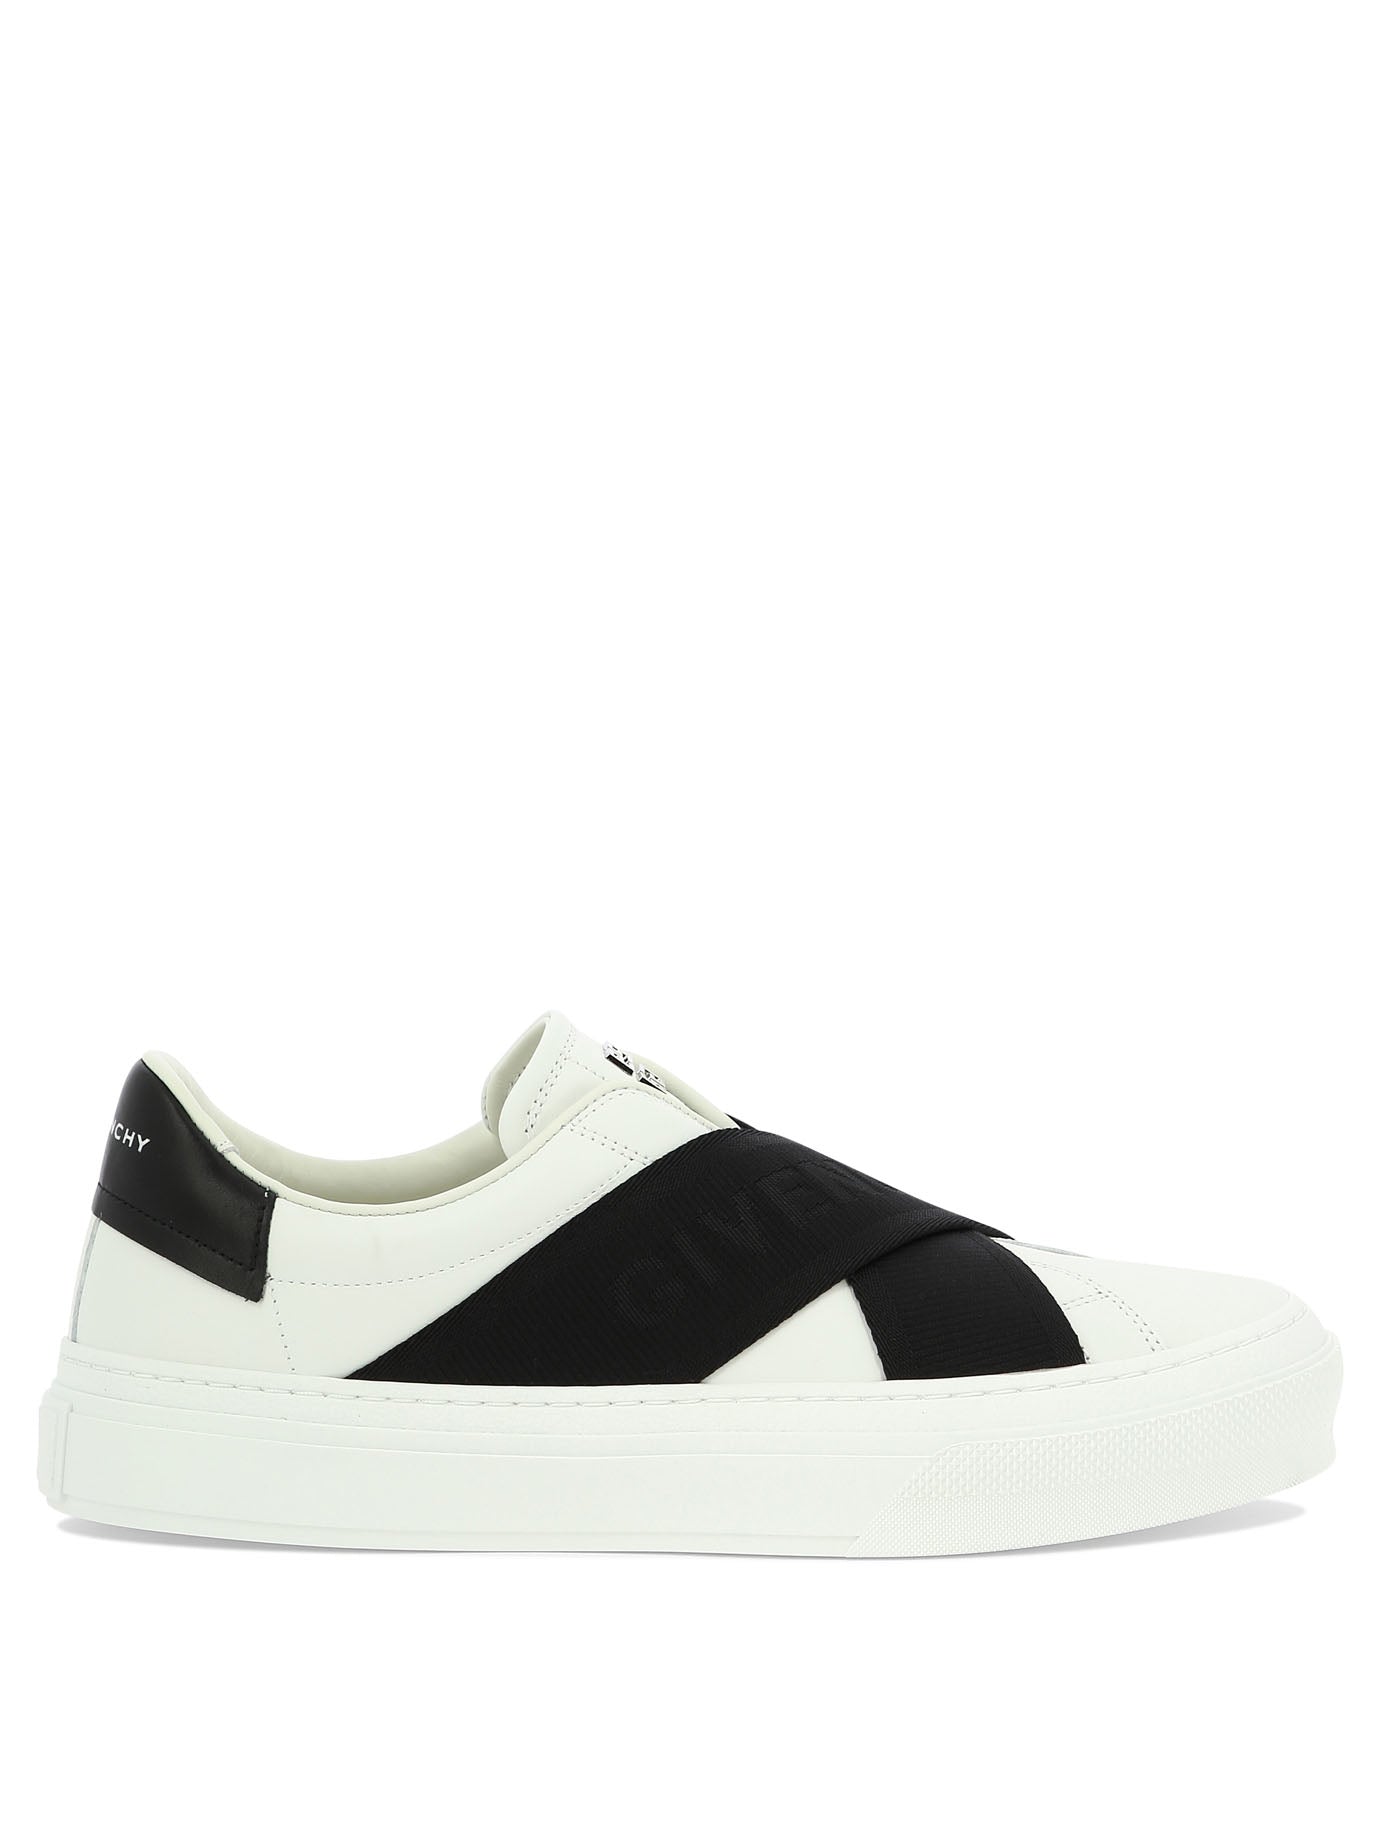 Givenchy City Sport Sneakers In Leather White/Black | Low-Top Sneaker